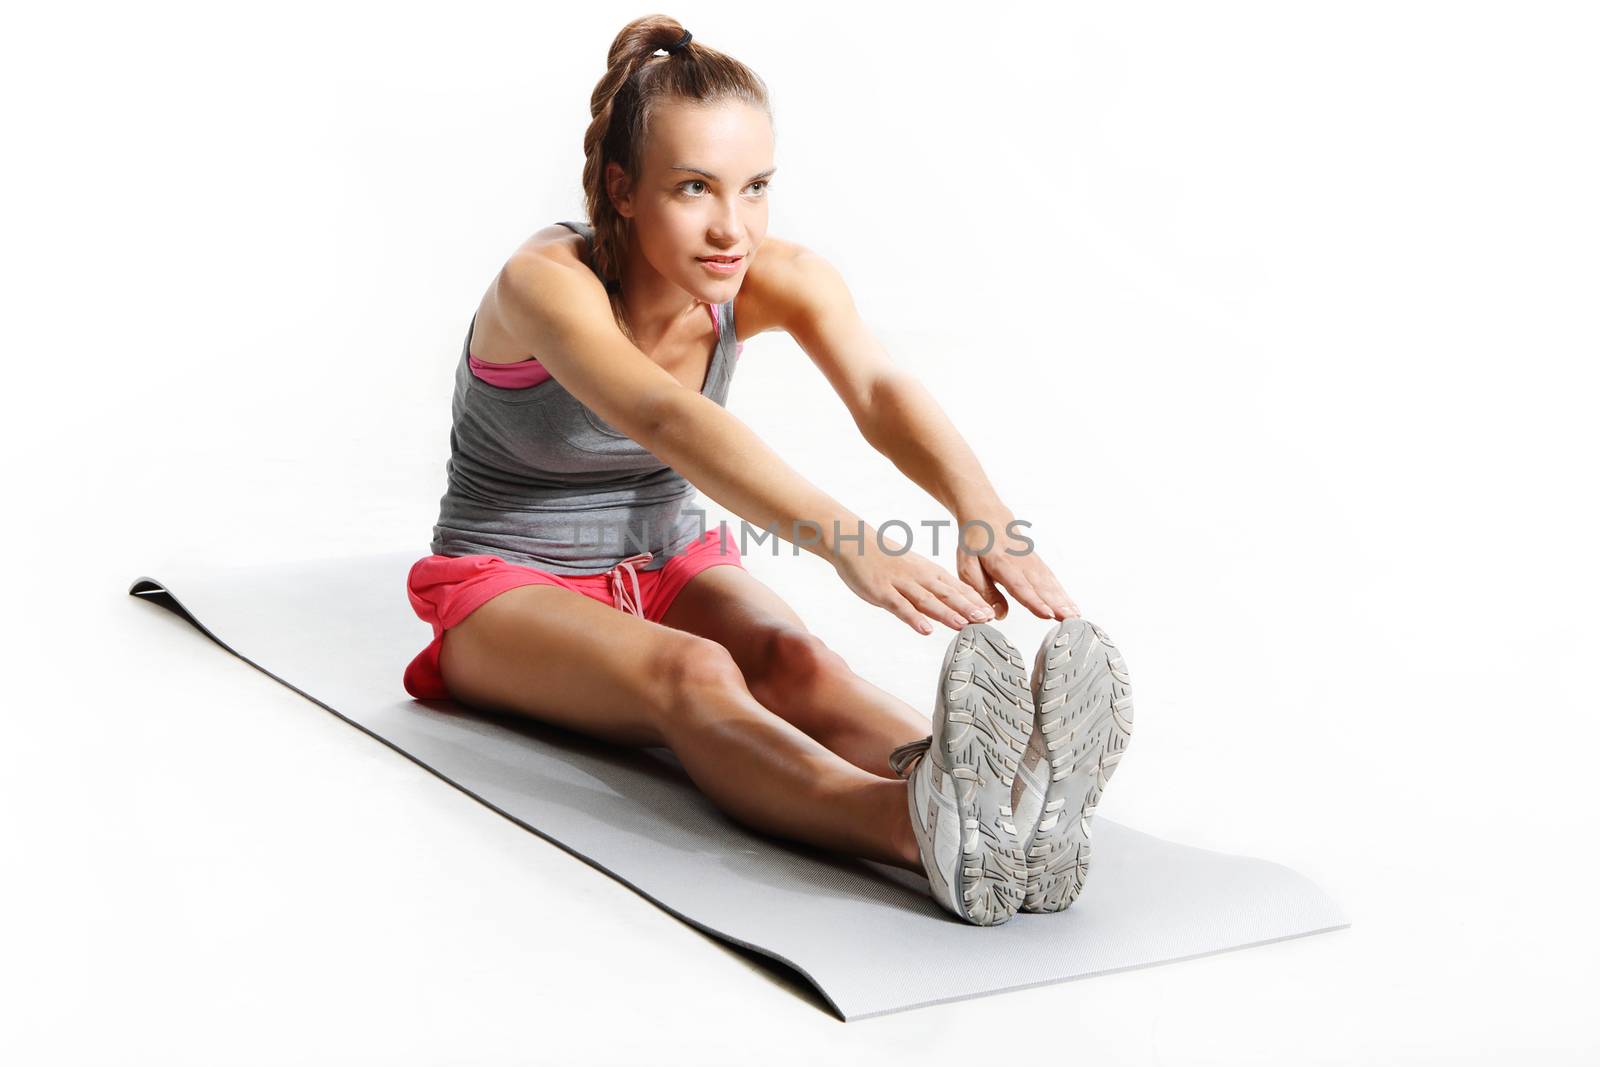 gymnastic exercises on the mat